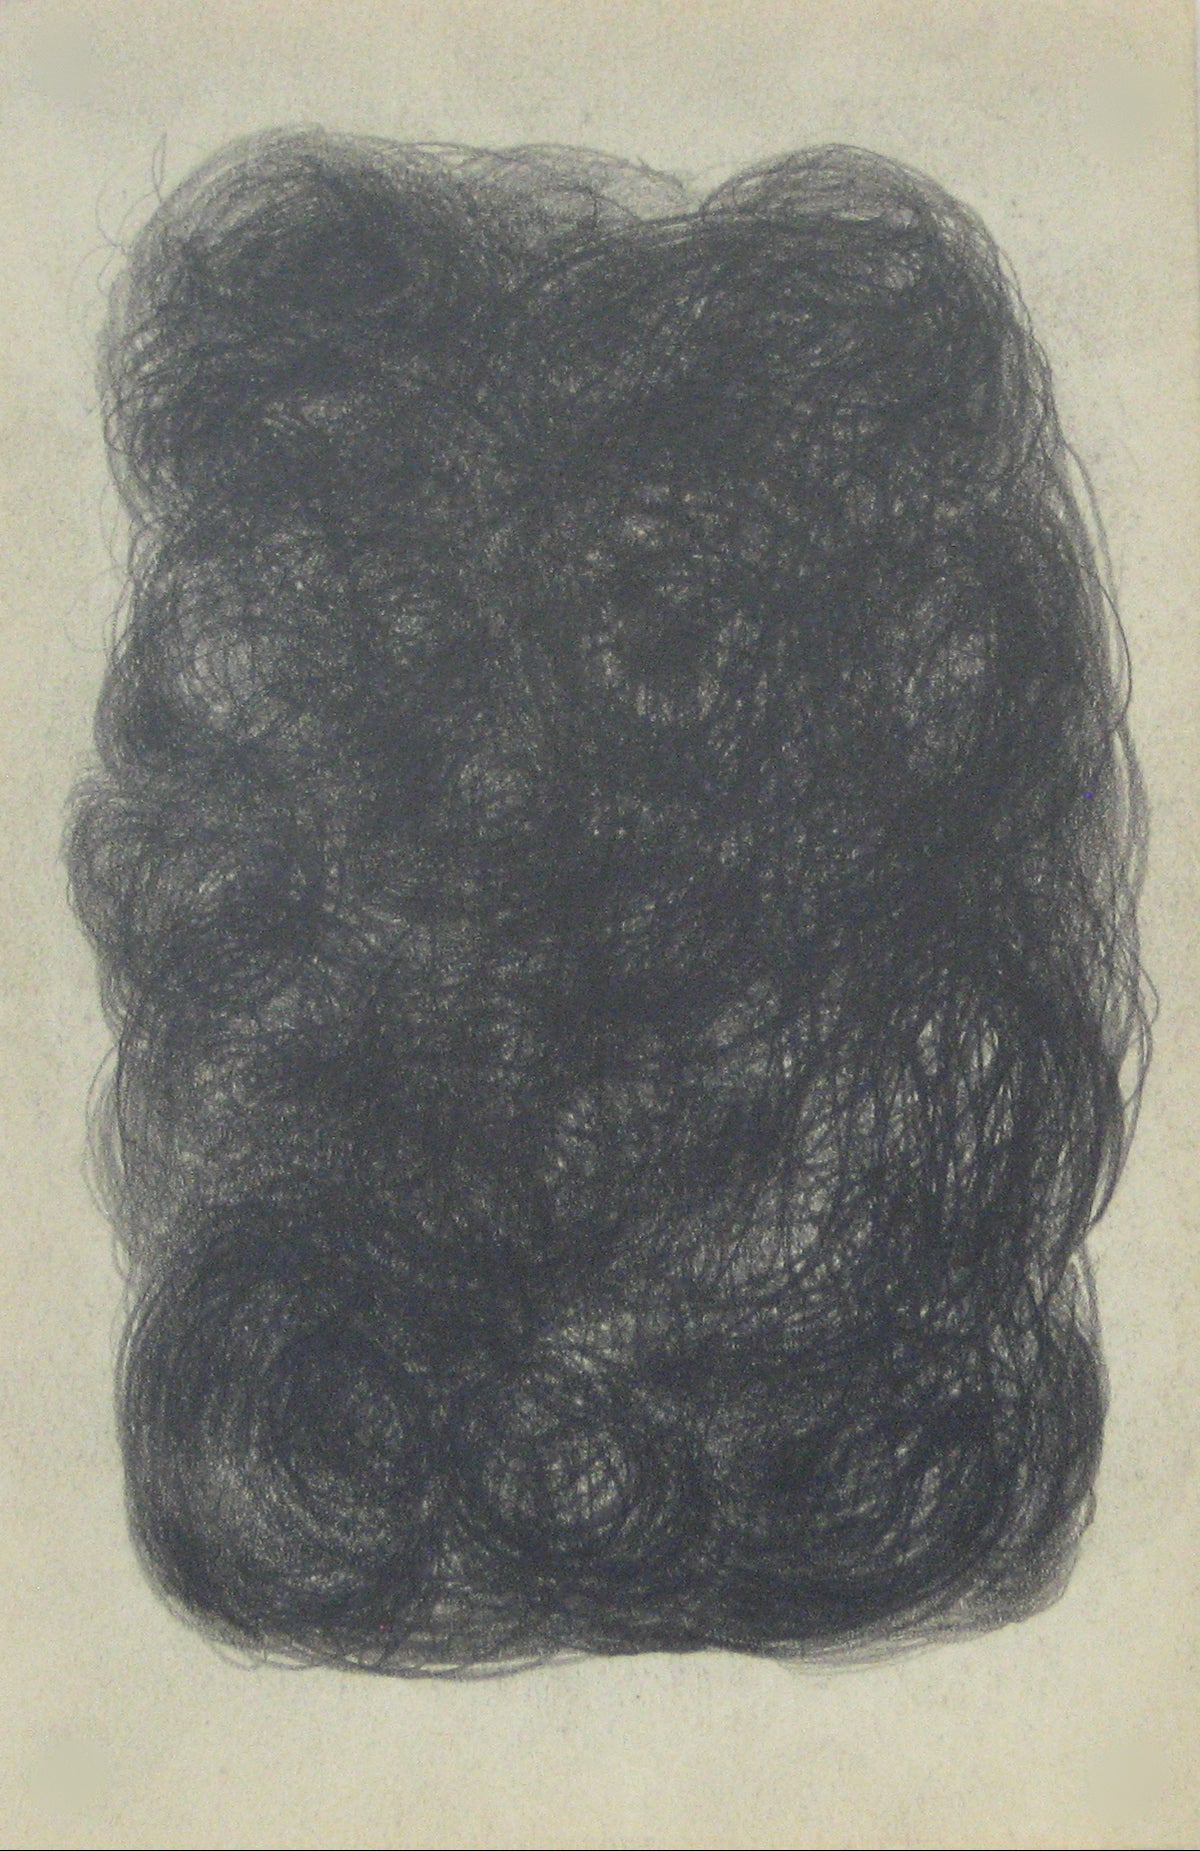 Swirled Graphite Abstract&lt;br&gt;Early-Mid 20th Century&lt;br&gt;&lt;br&gt;#14072